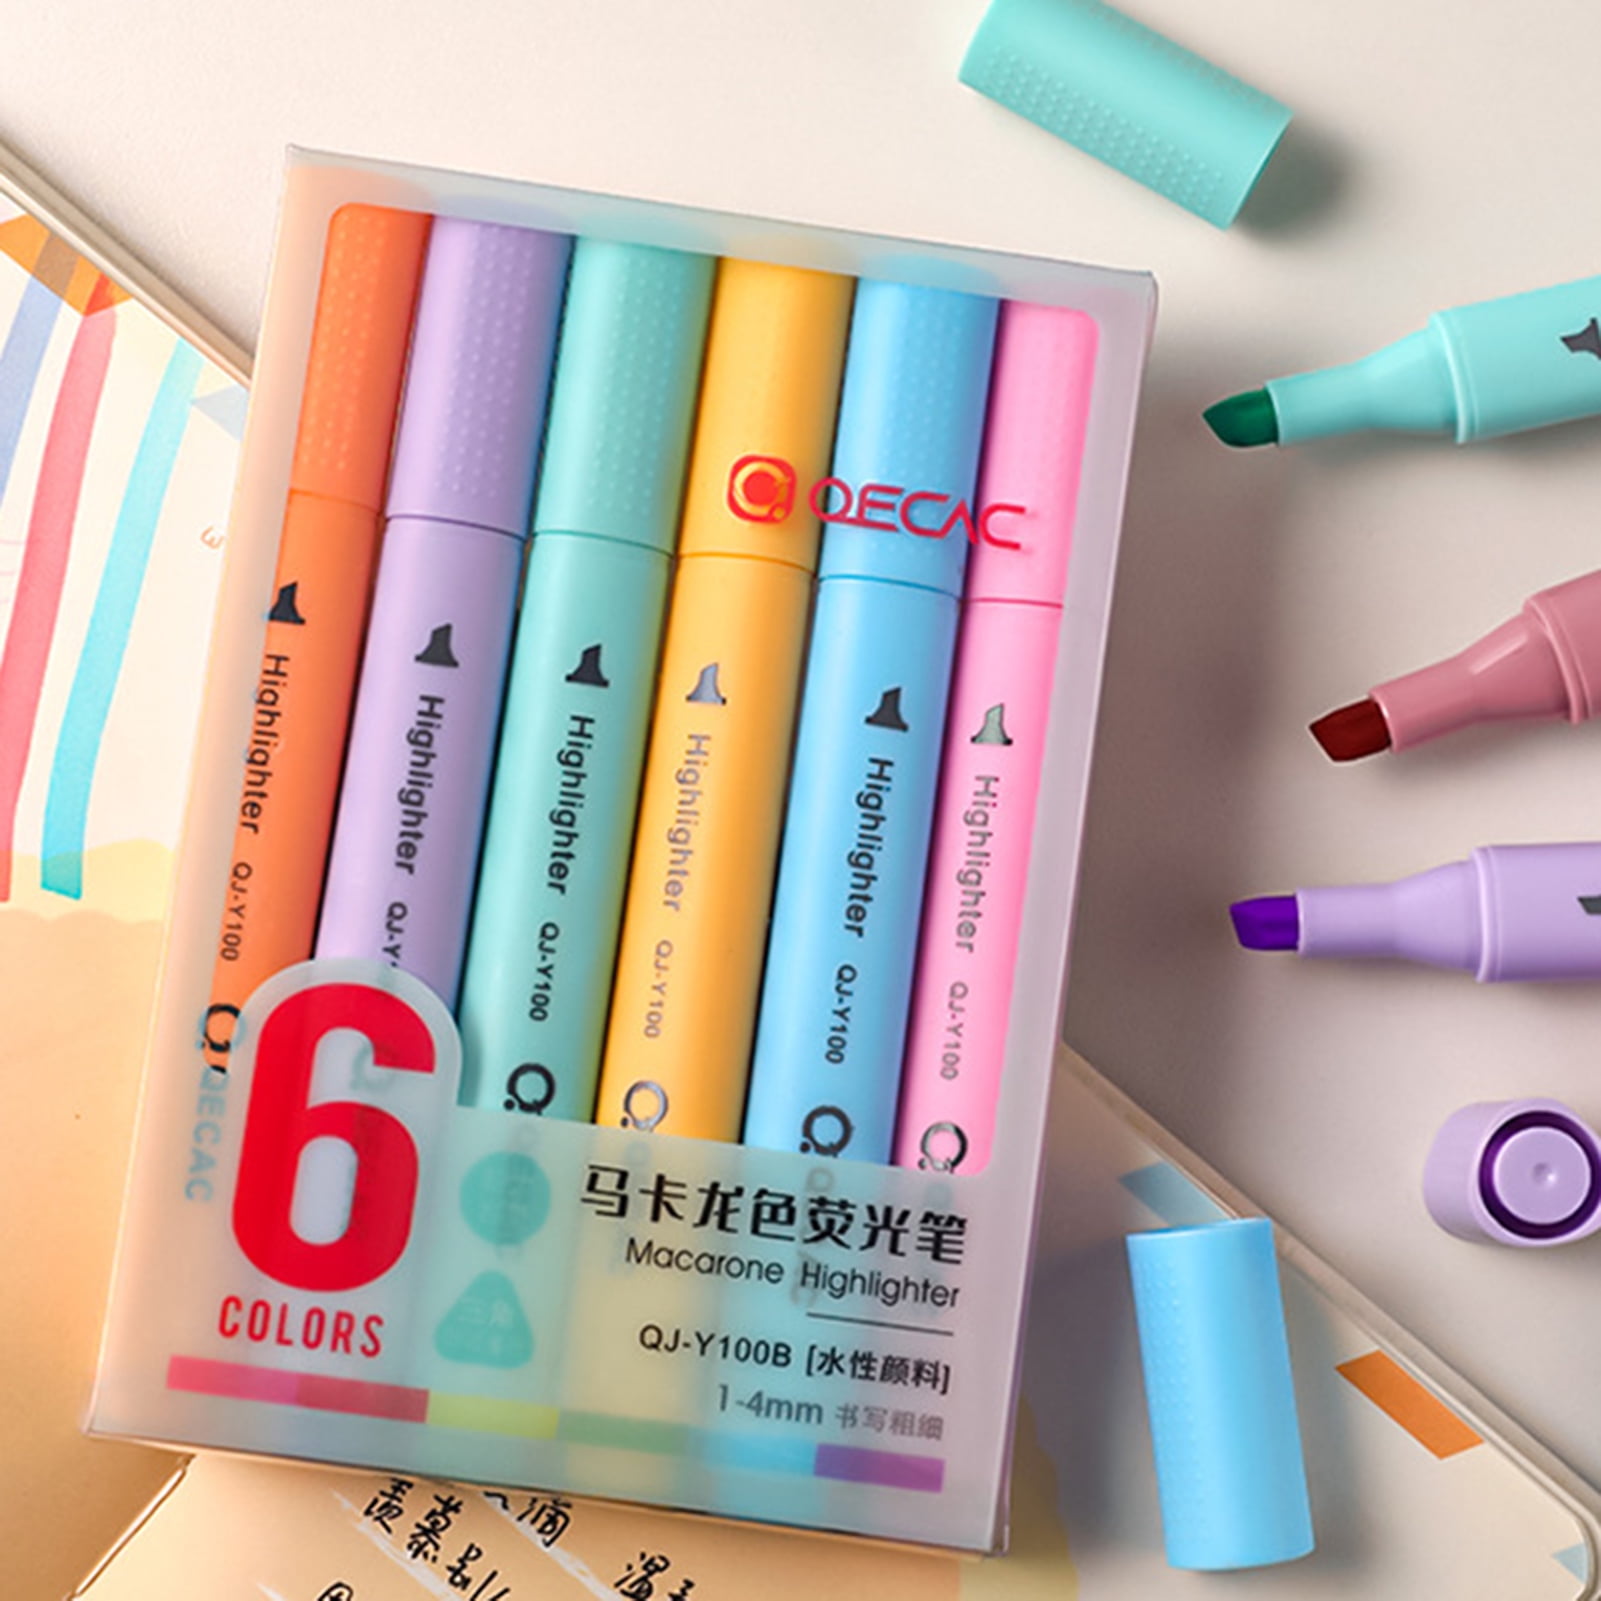  Tofficu 6pcs Highlighter Color Pens for Note Taking Highlight  Marker Pen Book Marker Portable Marking Pen Painting Paint Marker Pens  Daily Supplies Stationery Work Literature and Art Abs : Office